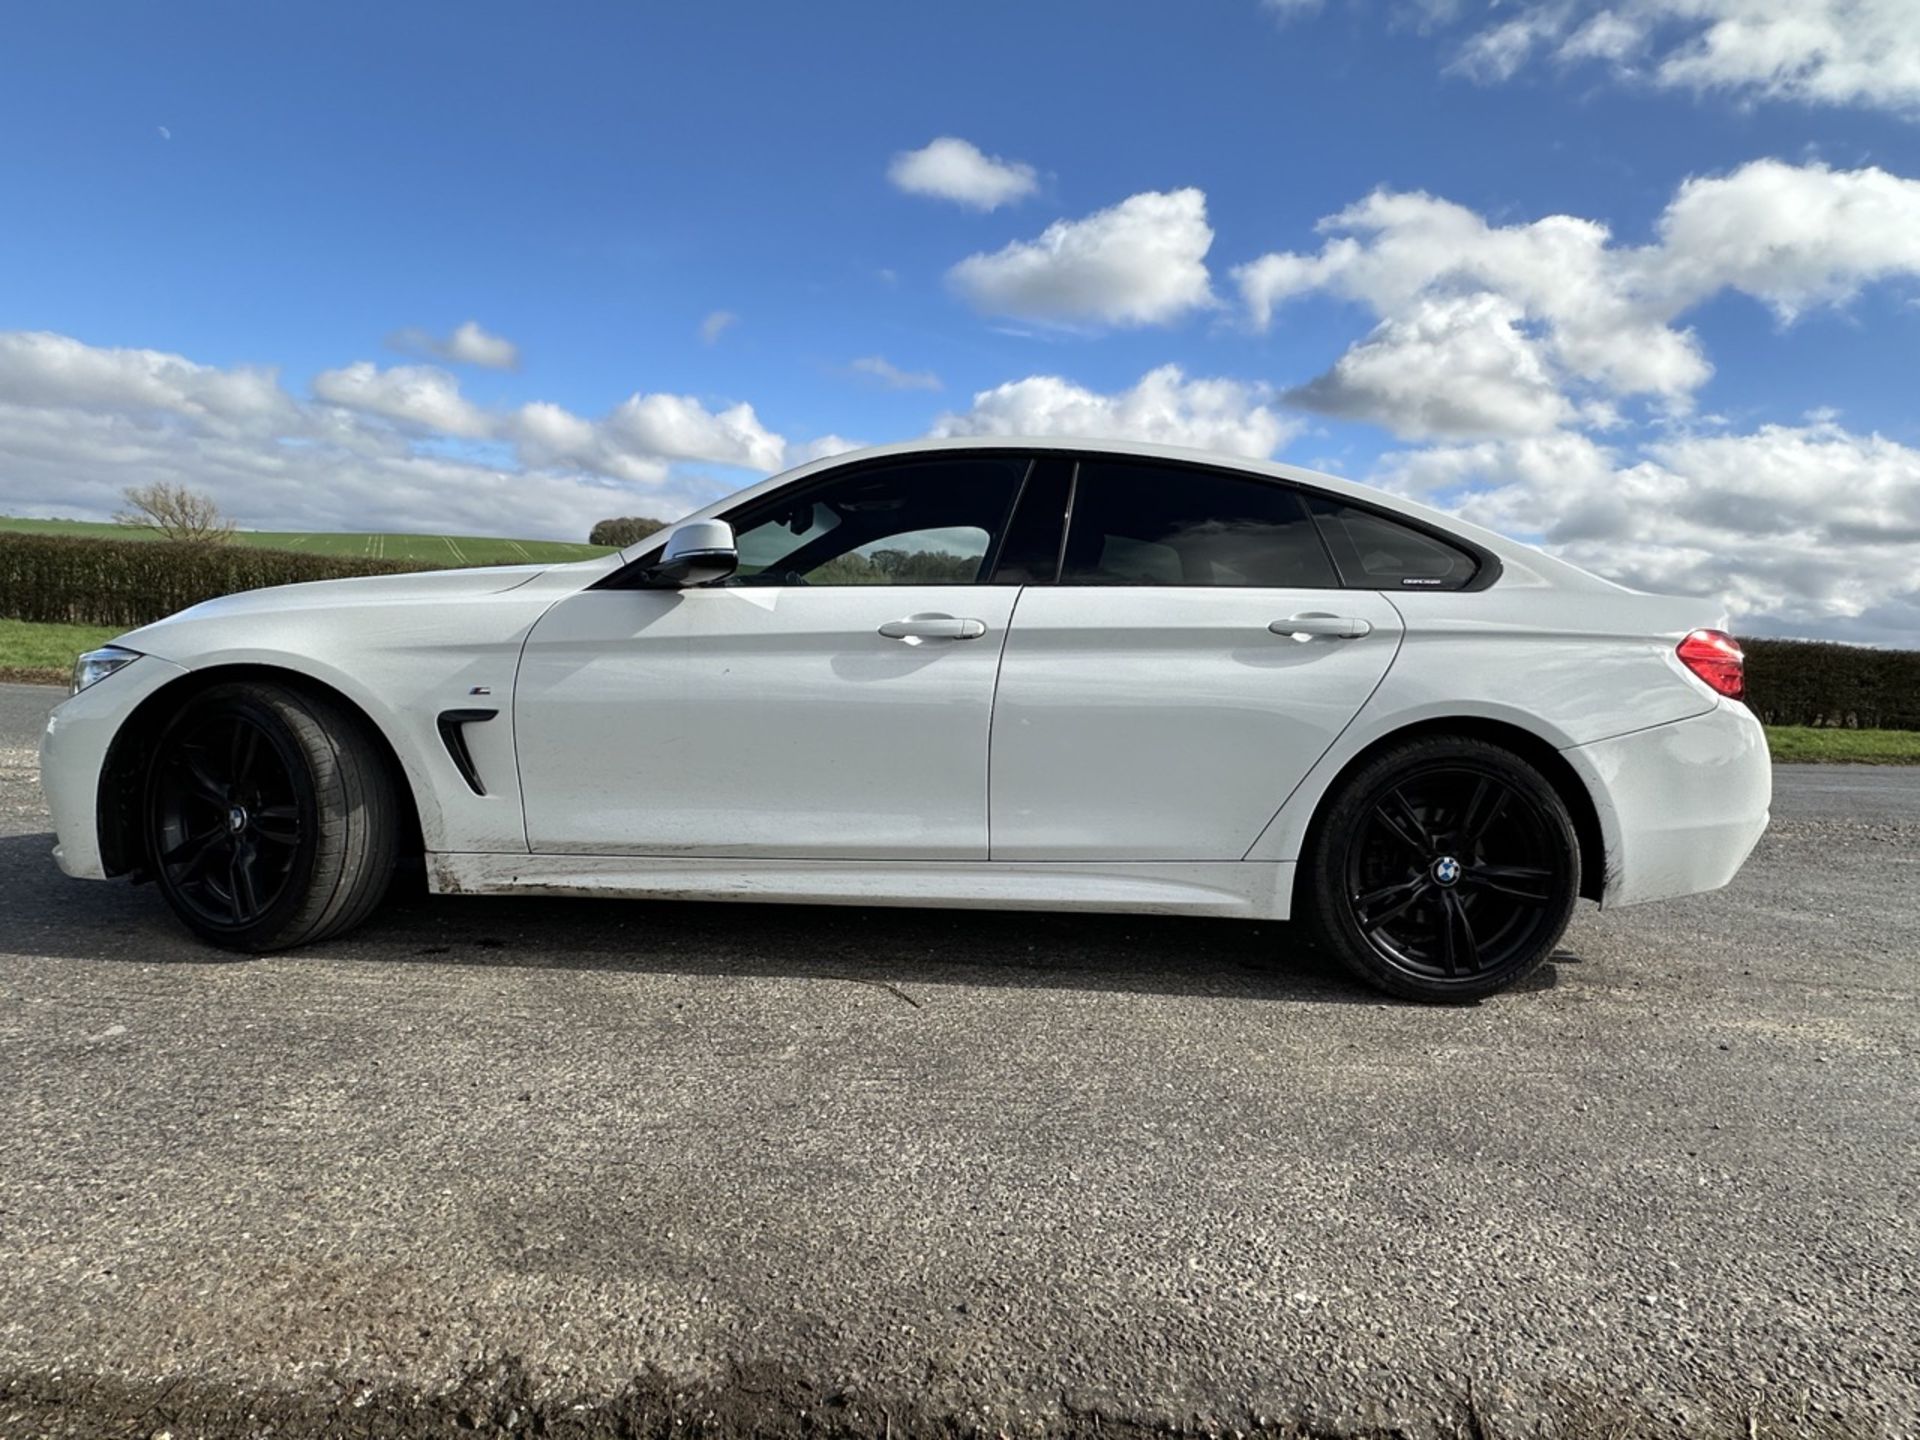 BMW 4 SERIES 420i M Sport 5dr [Professional Media] Manual - Petrol - 2.0 - Coupe- 54k miles - 2016 - Image 5 of 22